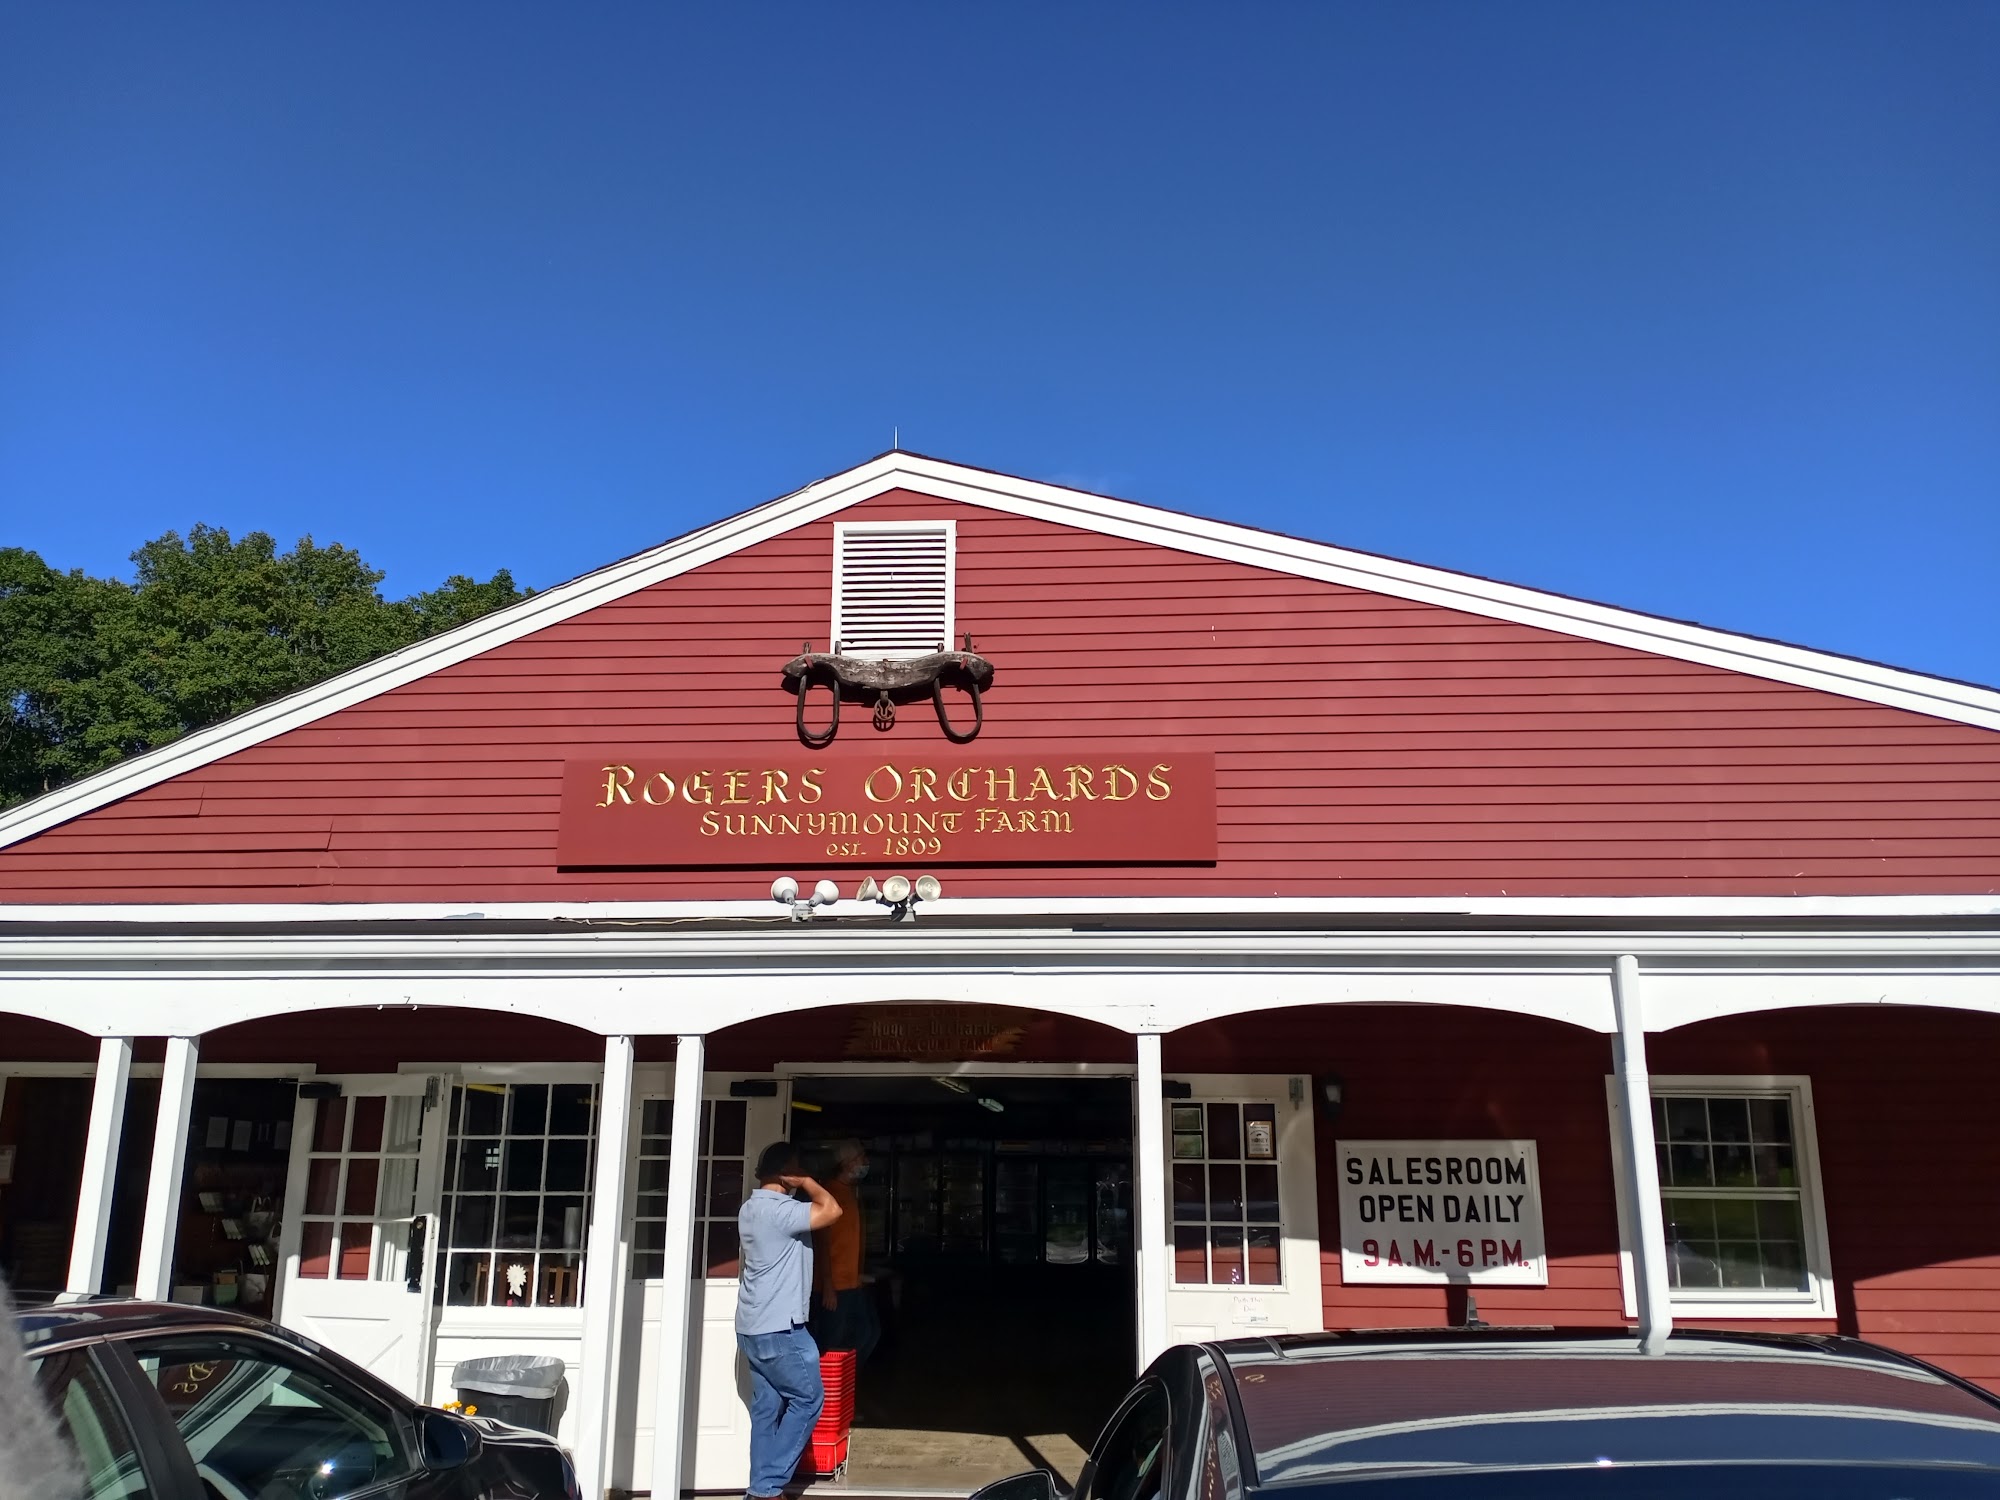 Rogers Orchards - Sunnymount Farm Store